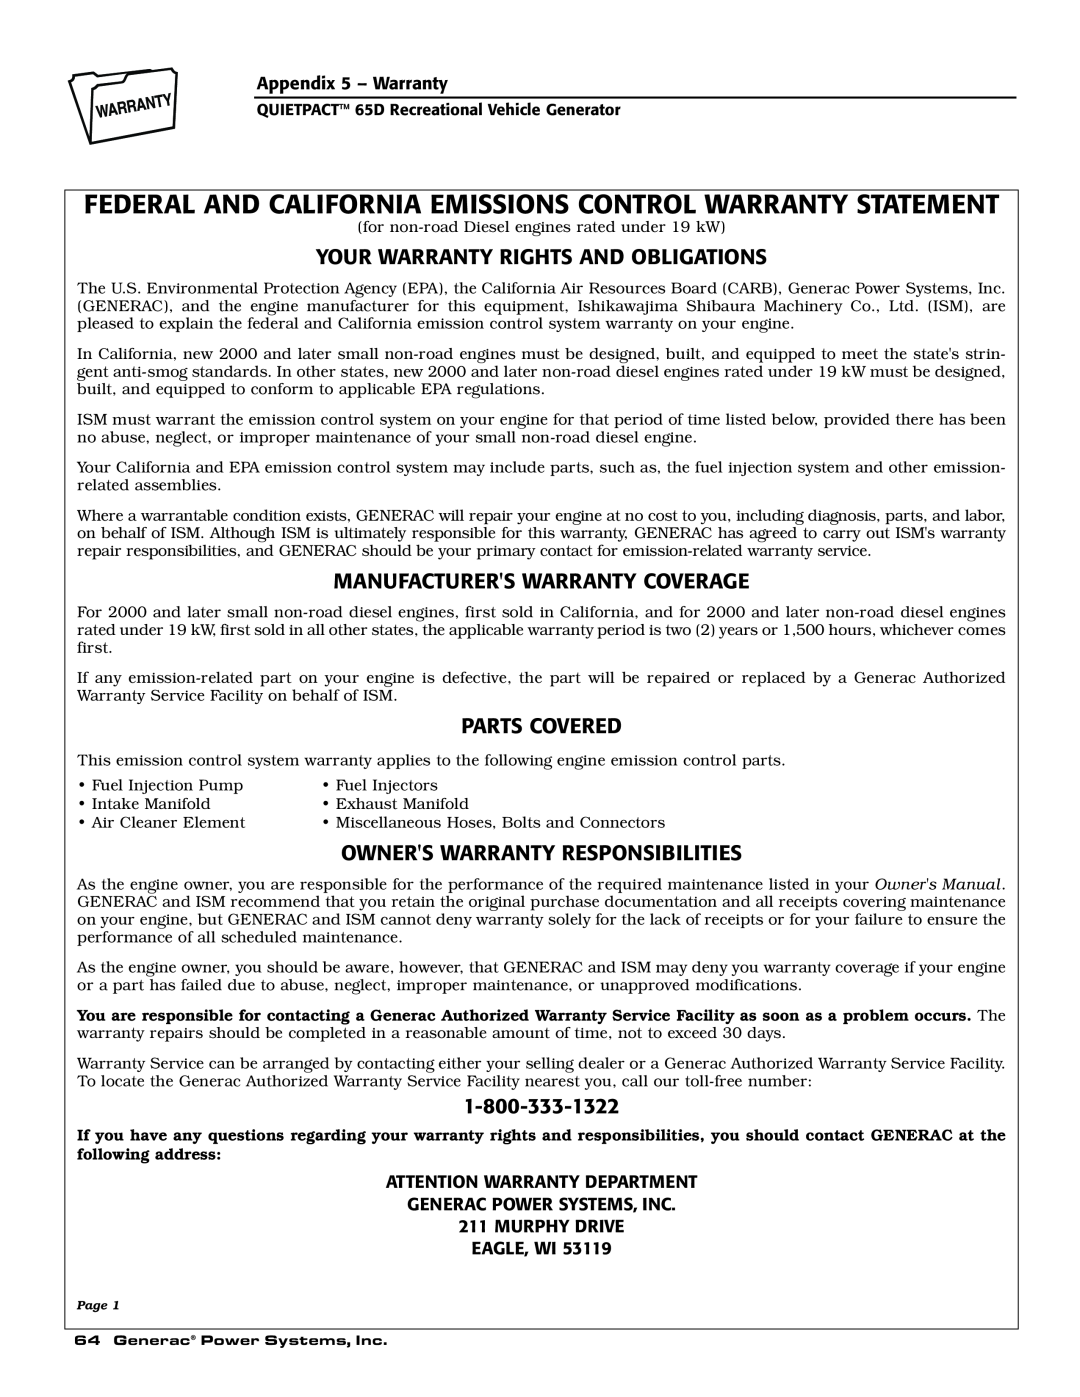 Generac 004614-1 Federal And California Emissions Control Warranty Statement, Your Warranty Rights And Obligations 